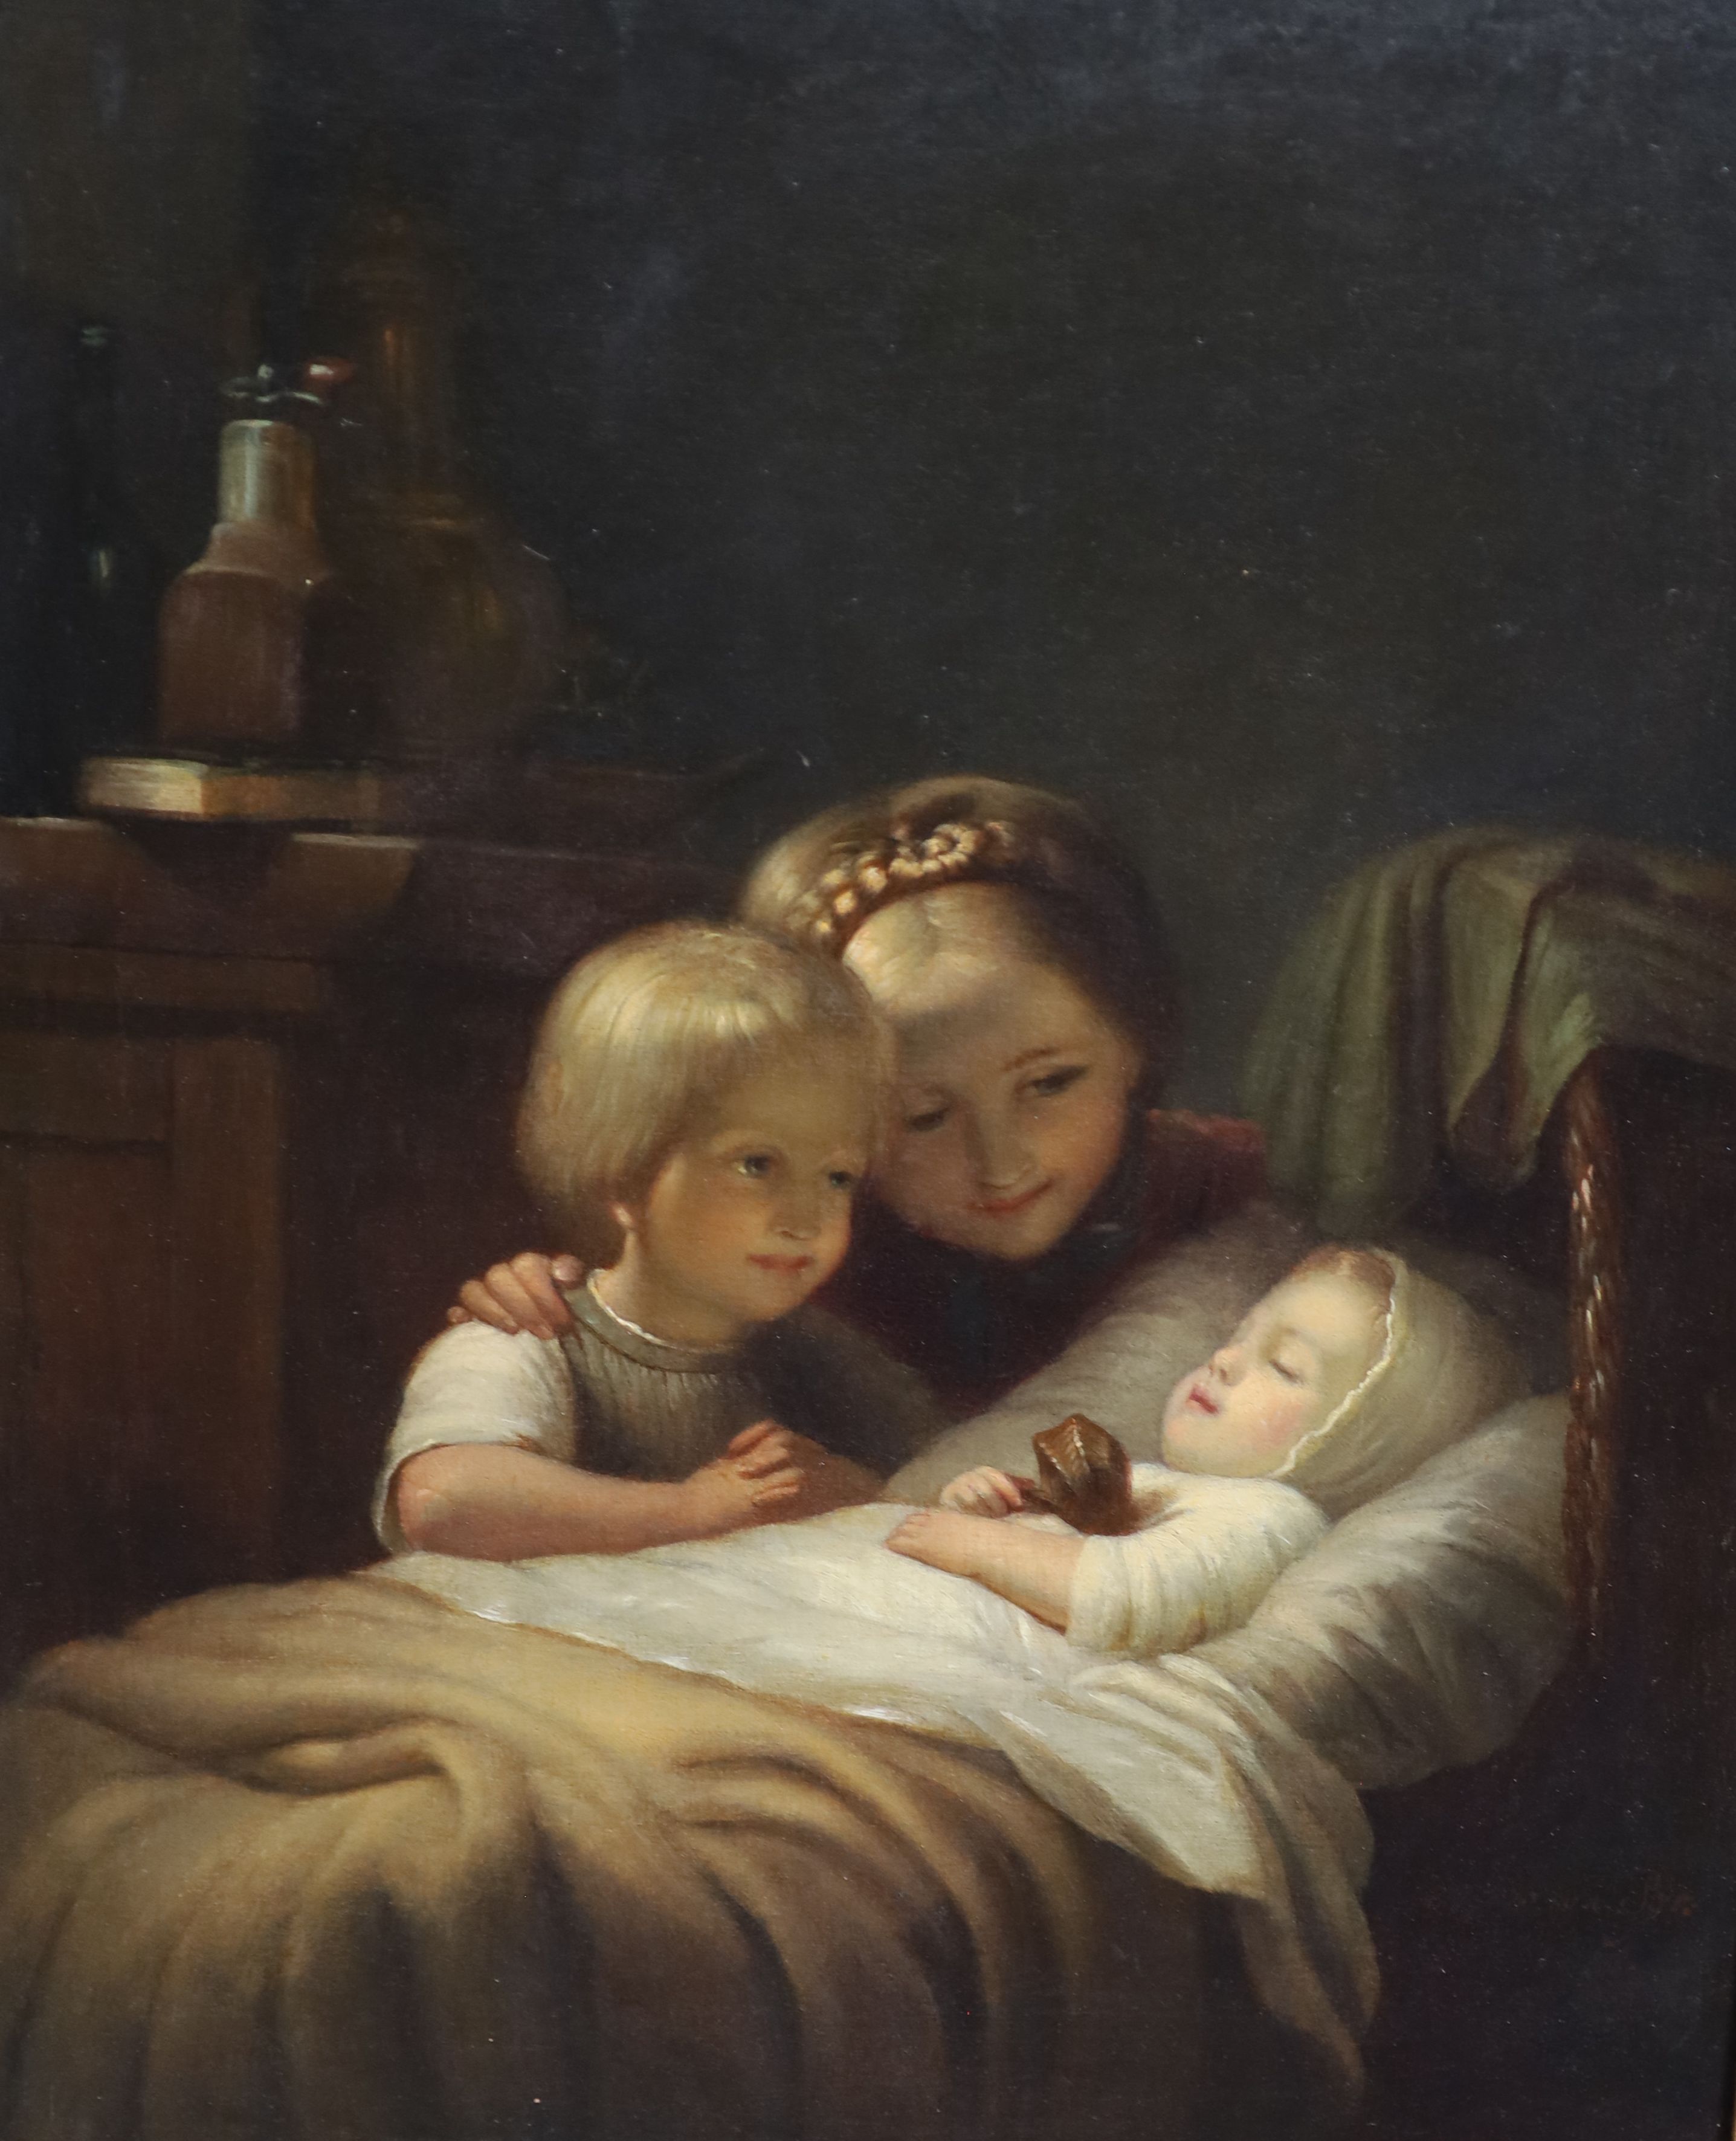 19th century German School, Two children looking at a sleeping baby, oil on canvas, 46.5 x 37.5cm